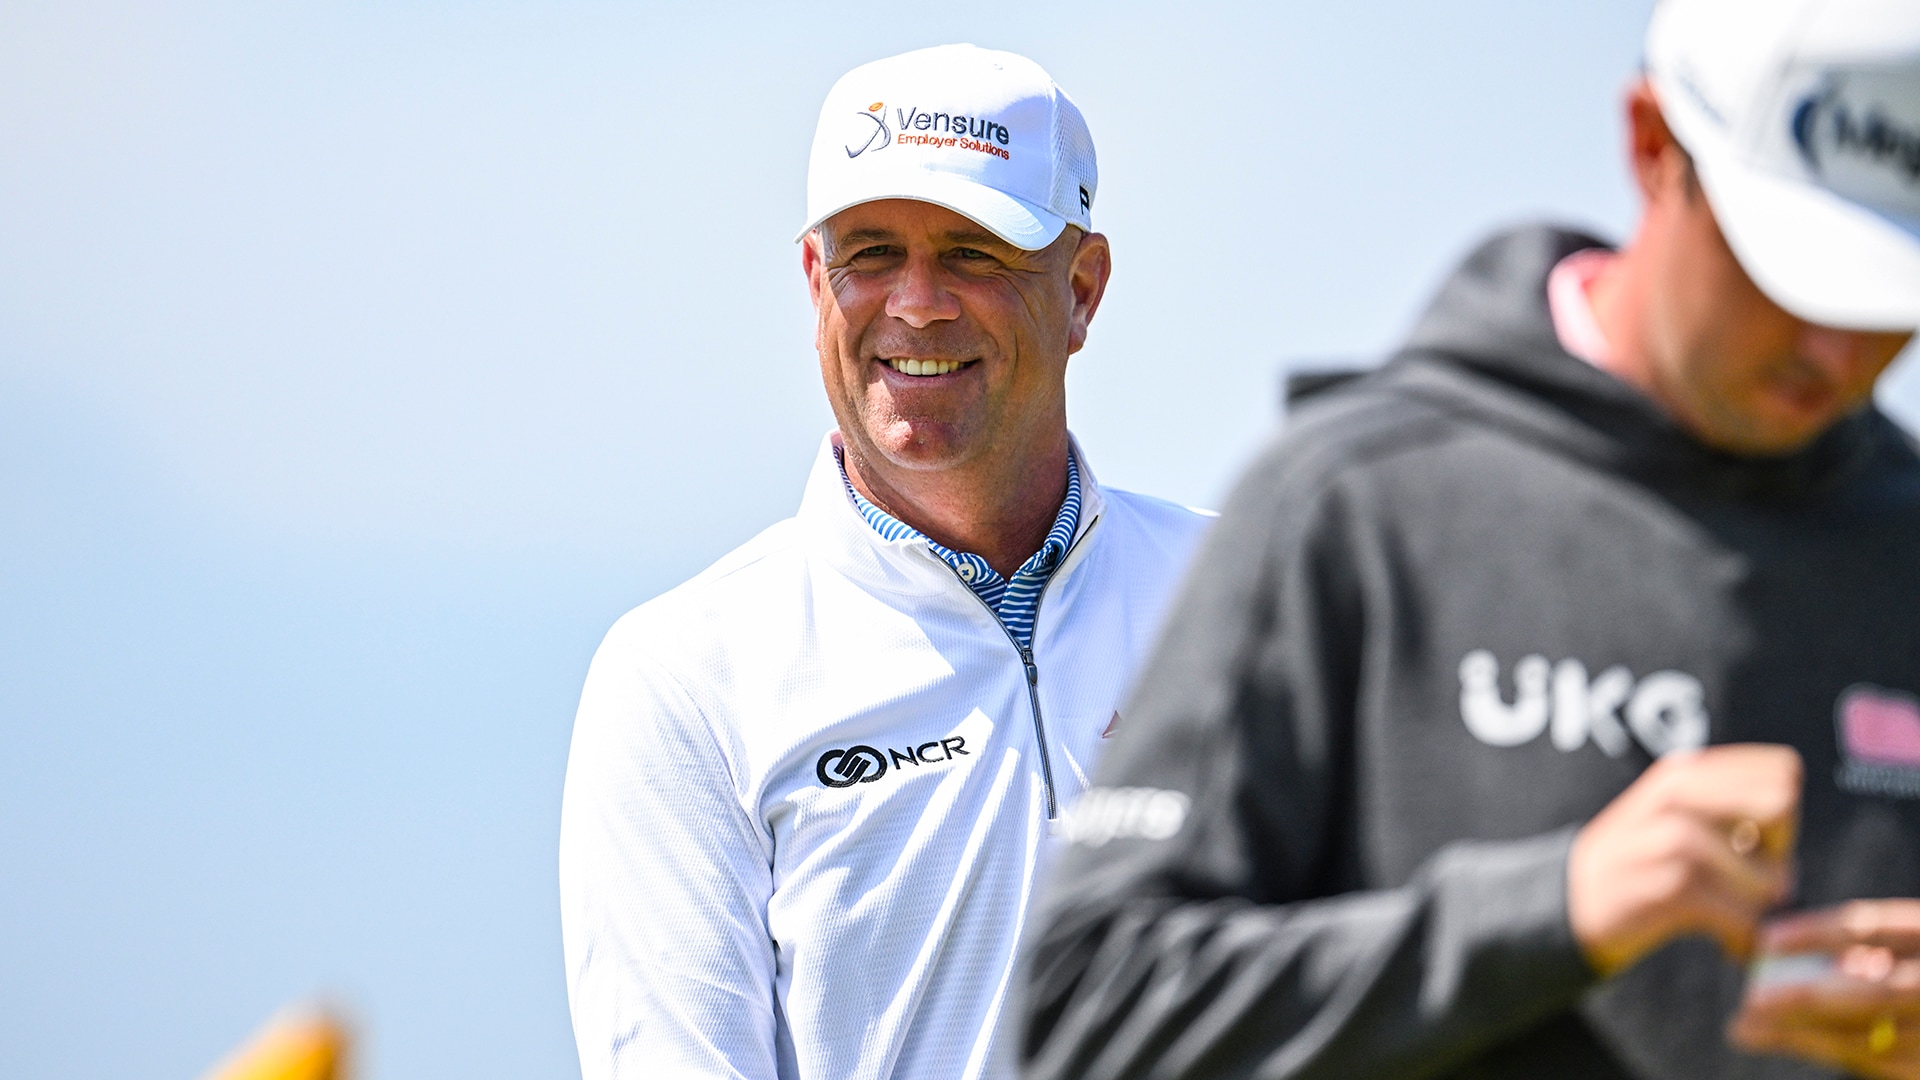 Stewart Cink tabbed as Ryder Cup vice captain for first time